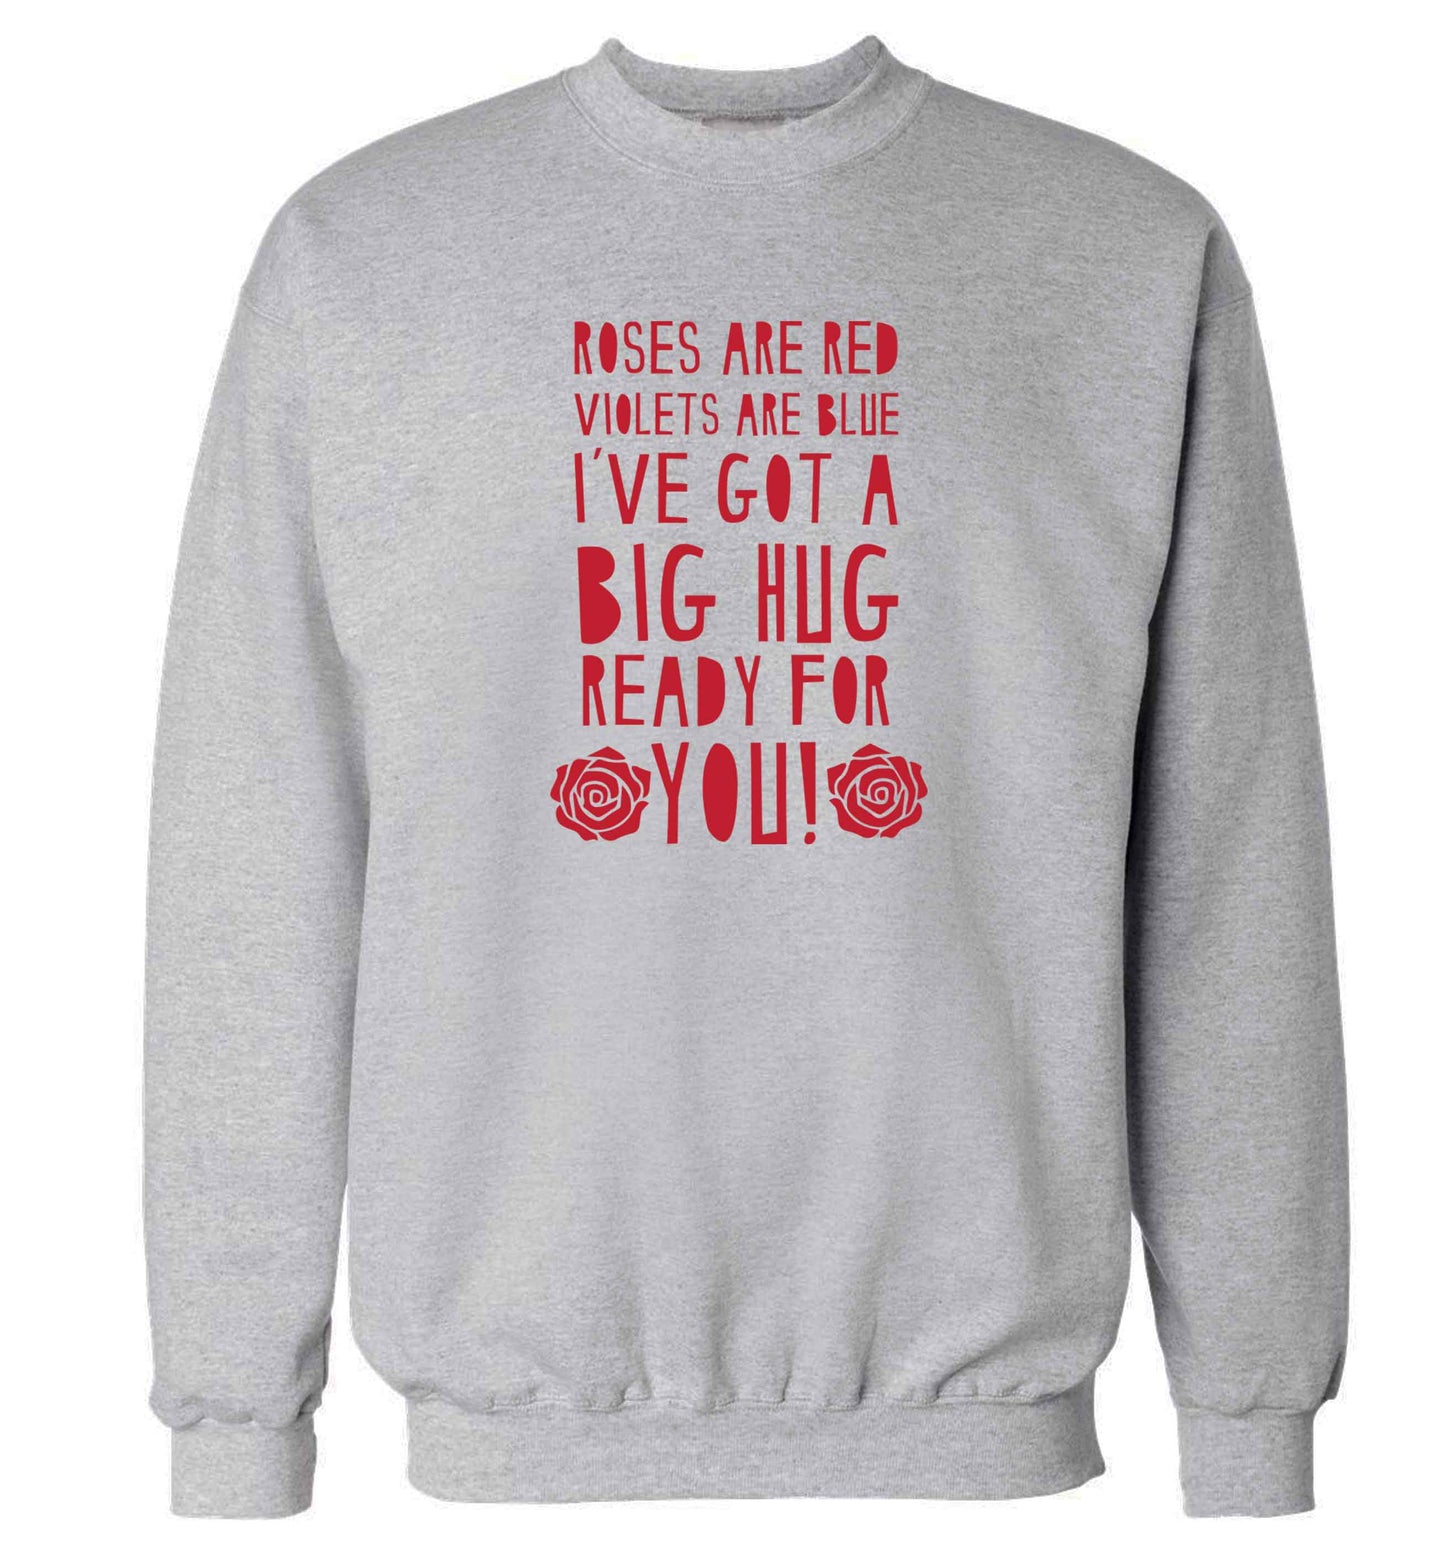 Roses are red violets are blue I've got a big hug coming for you adult's unisex grey sweater 2XL